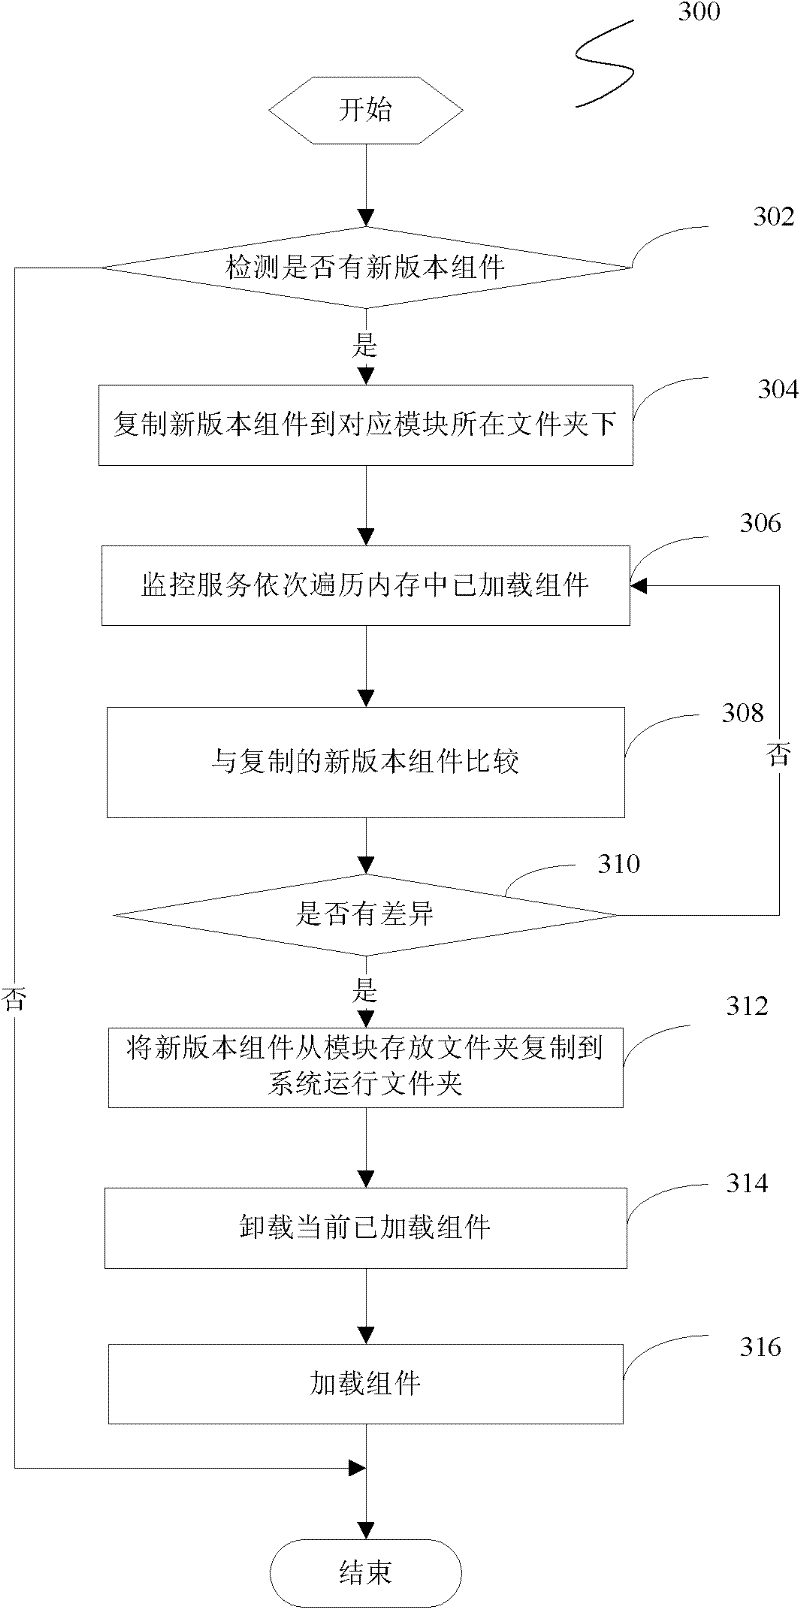 Method and system for dynamically loading component